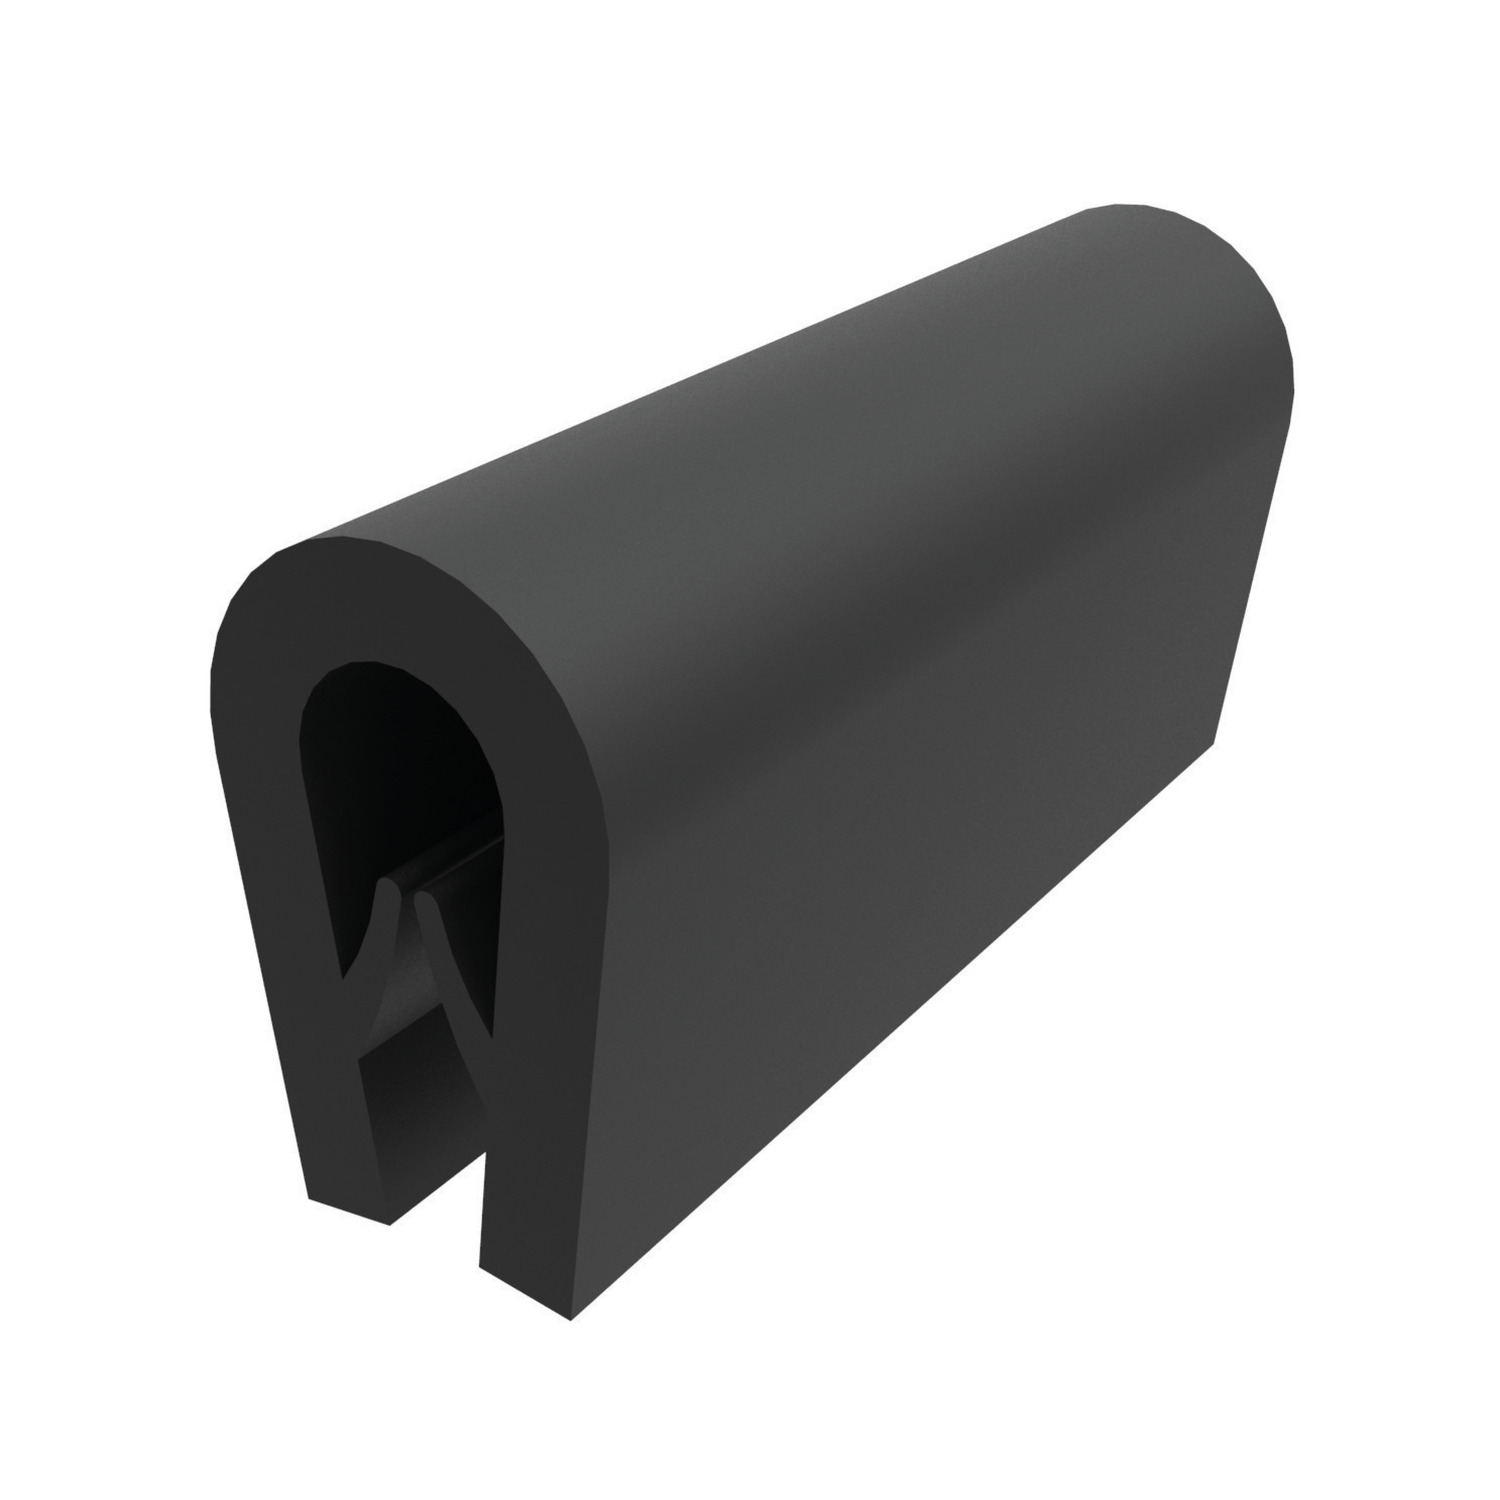 Gasket Standard gaskets made from EPDM rubber, suitable for industrial use. Supplied in 10m lengths as standard. Larger lengths in multiples of 10m are available on request.